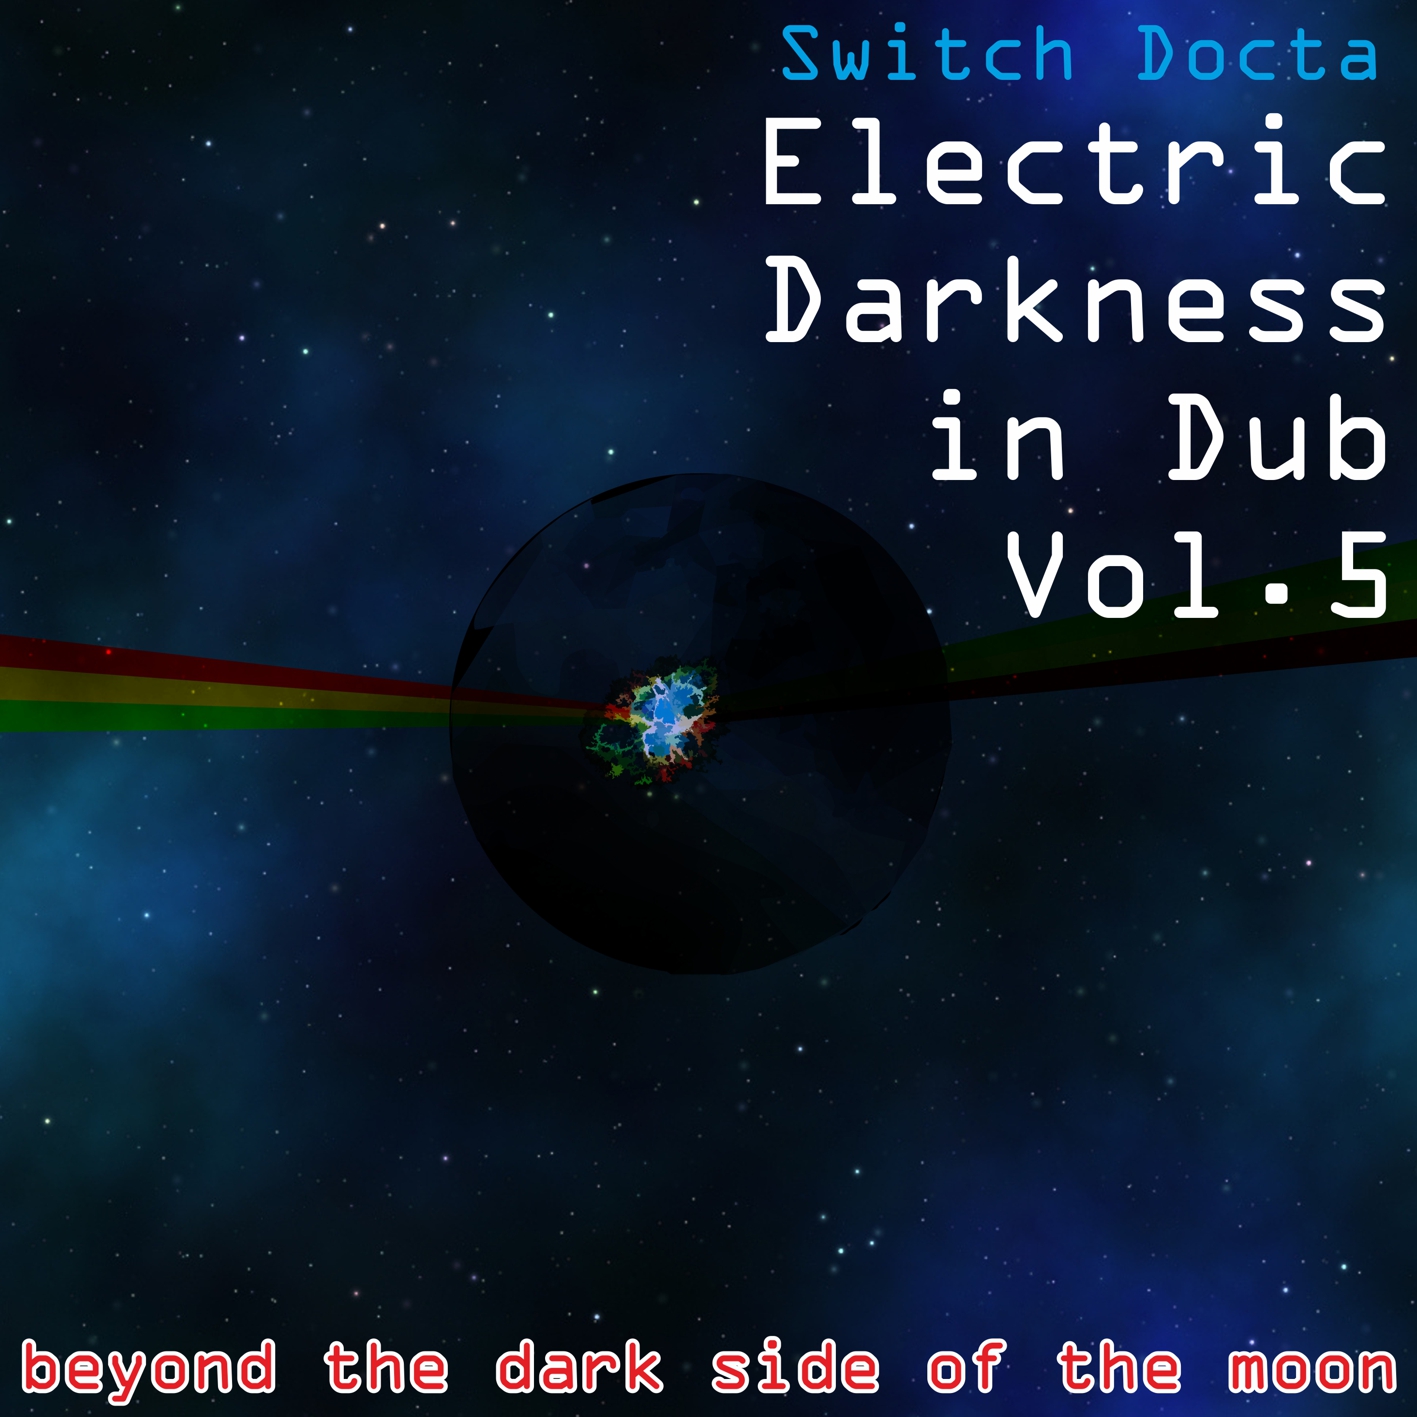 Electric Darkness in Dub Vol.5 (beyond the dark side of the moon)